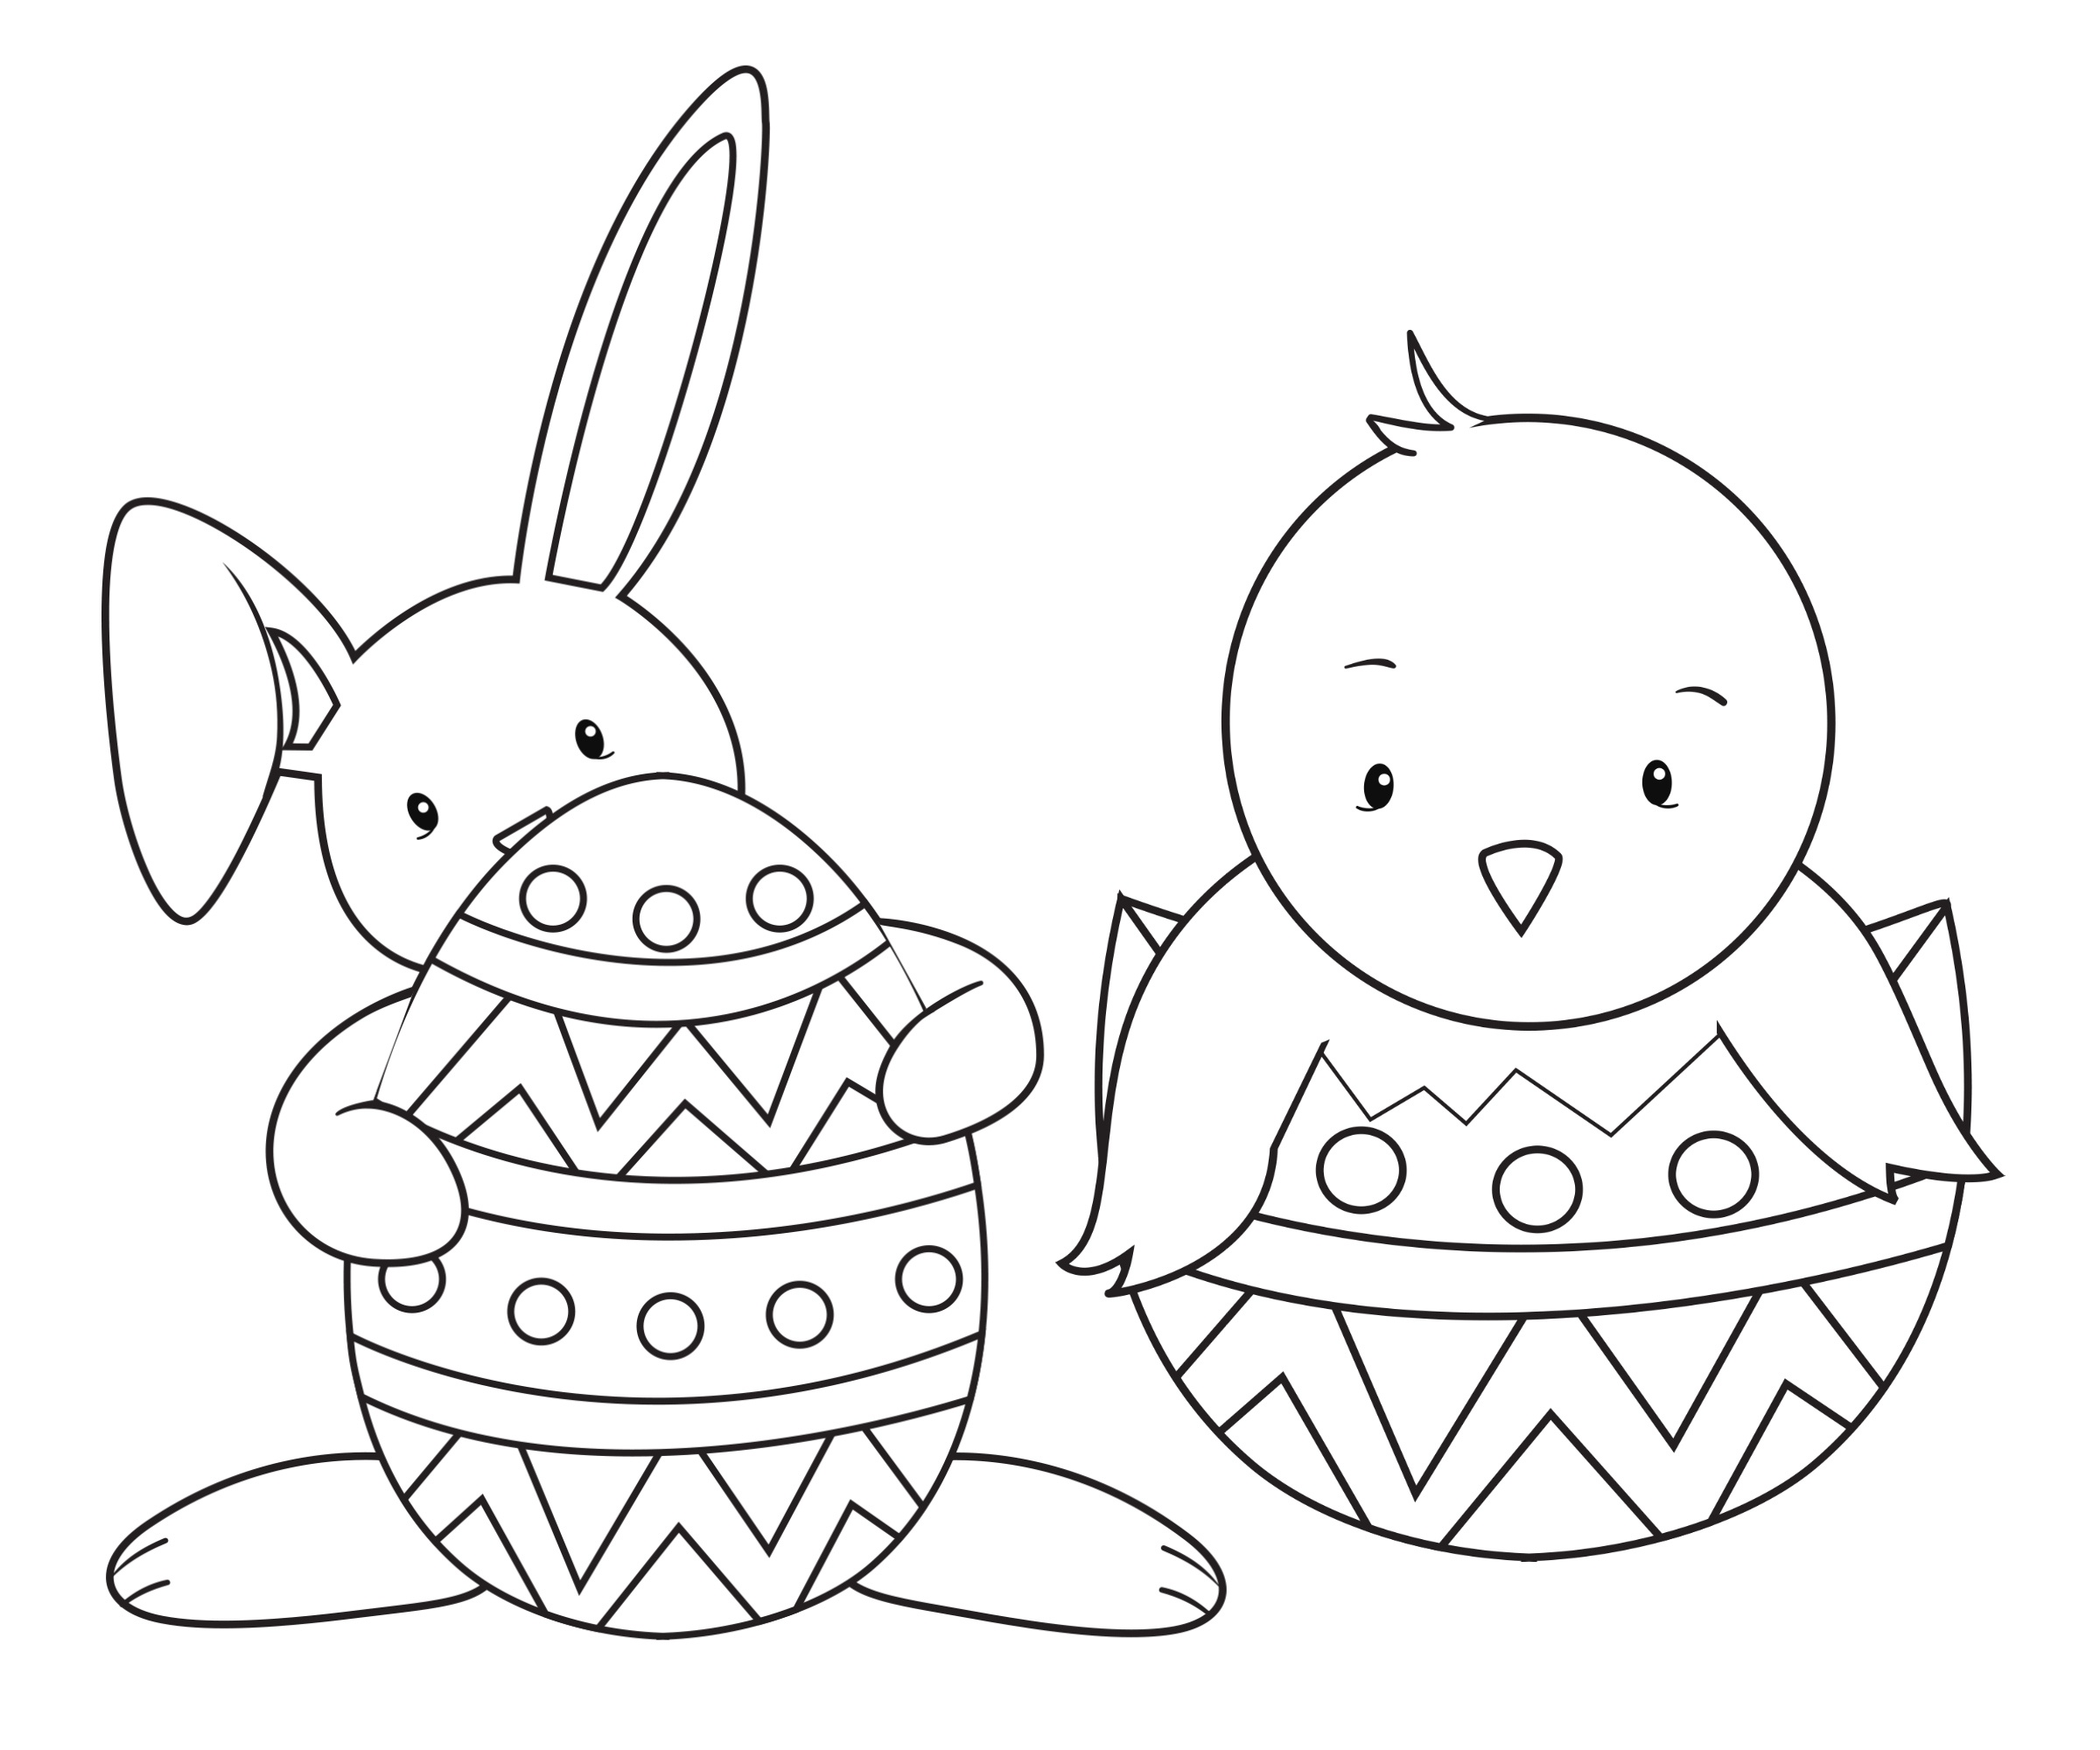 Download Free Printable Easter Colouring Sheets | Free Printable